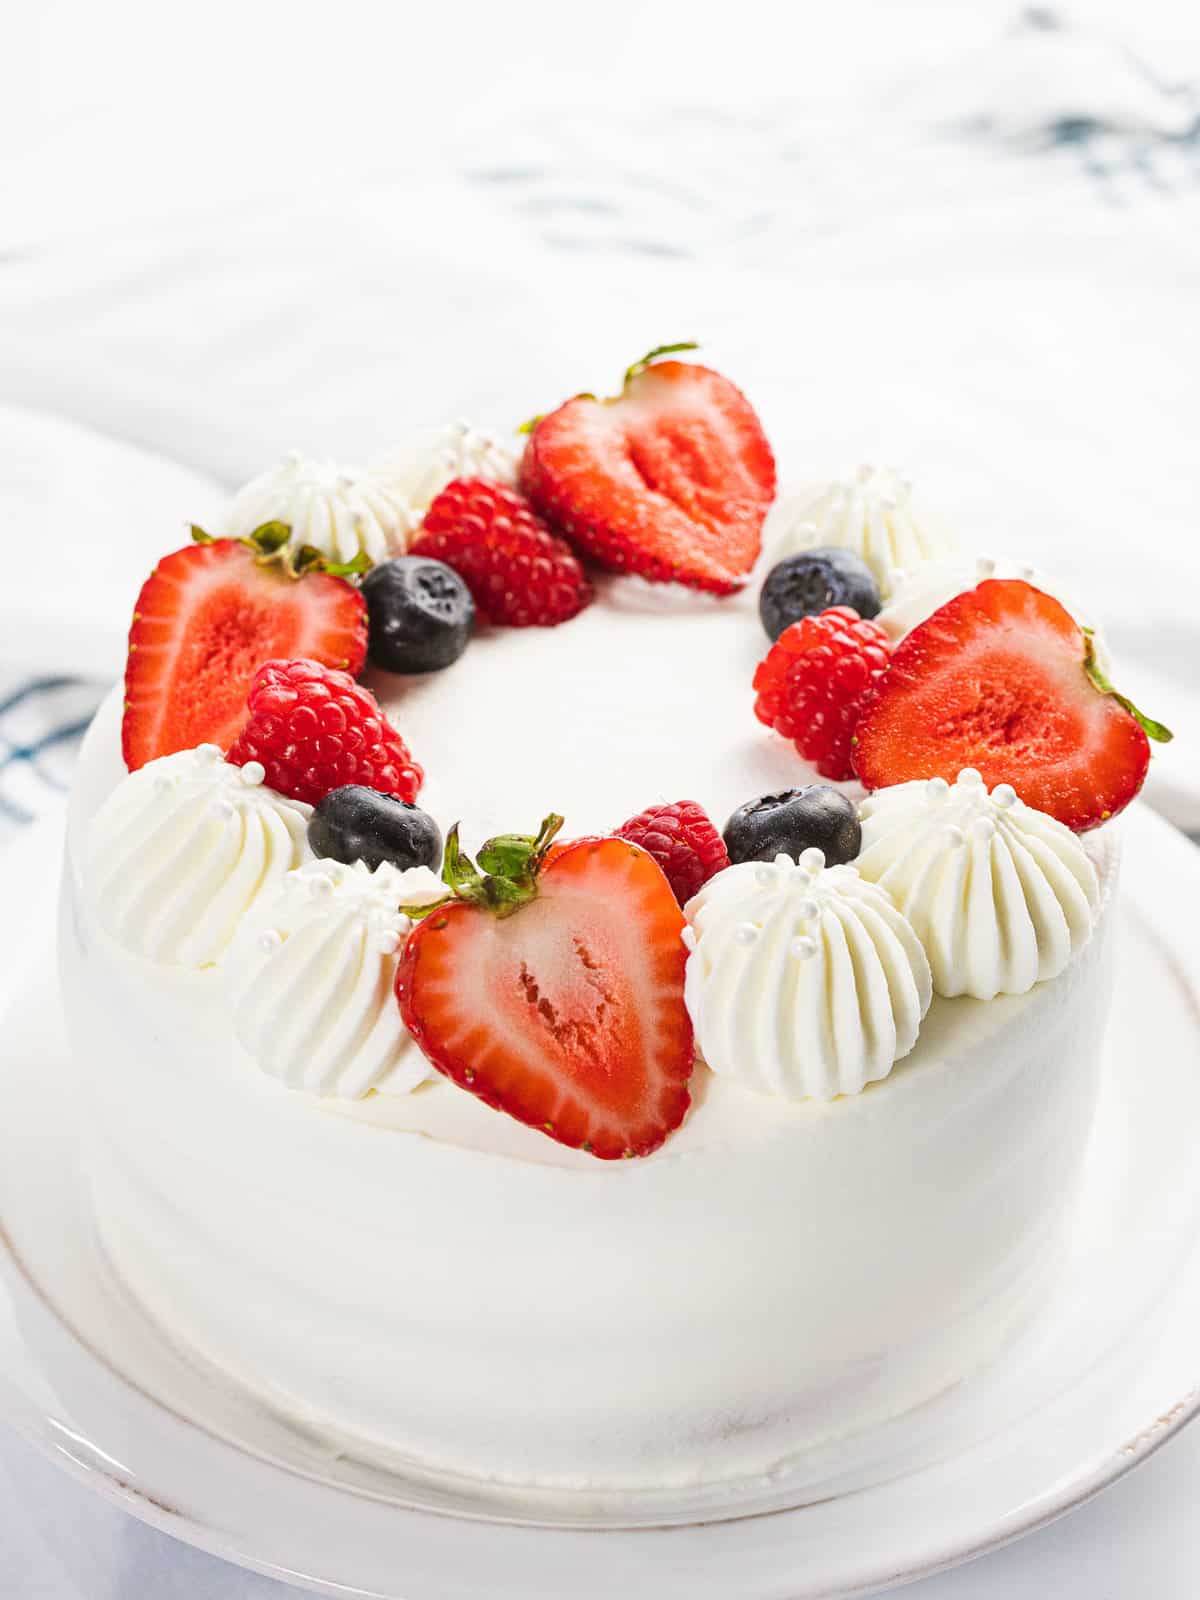 Berry Chantilly cake with fresh strawberries, blueberries, and raspberries.